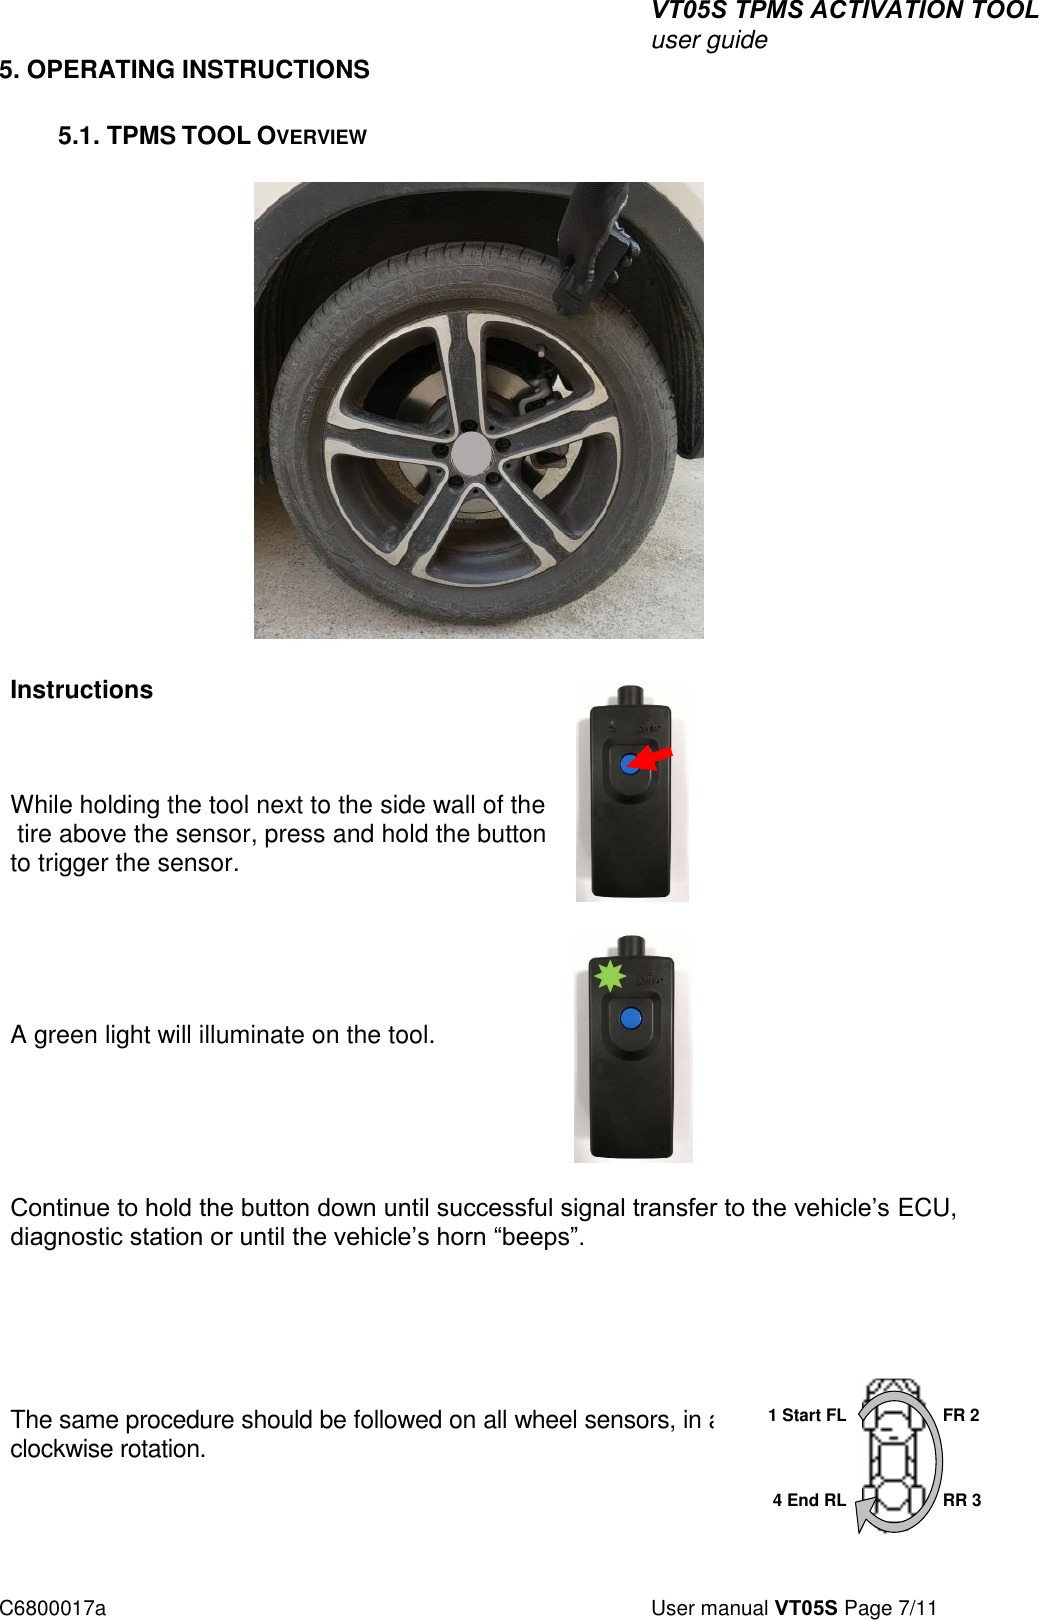 VT05S TPMS ACTIVATION TOOL user guide C6800017a  User manual VT05S Page 7/11 5. OPERATING INSTRUCTIONS5.1. TPMS TOOL OVERVIEW Instructions While holding the tool next to the side wall of the  tire above the sensor, press and hold the button to trigger the sensor. A green light will illuminate on the tool. Continue to hold the button down until successful signal transfer to the vehicle’s ECU, diagnostic station or until the vehicle’s horn “beeps”.  The same procedure should be followed on all wheel sensors, in a clockwise rotation.  1 Start FL 4 End RL FR 2 RR 3 